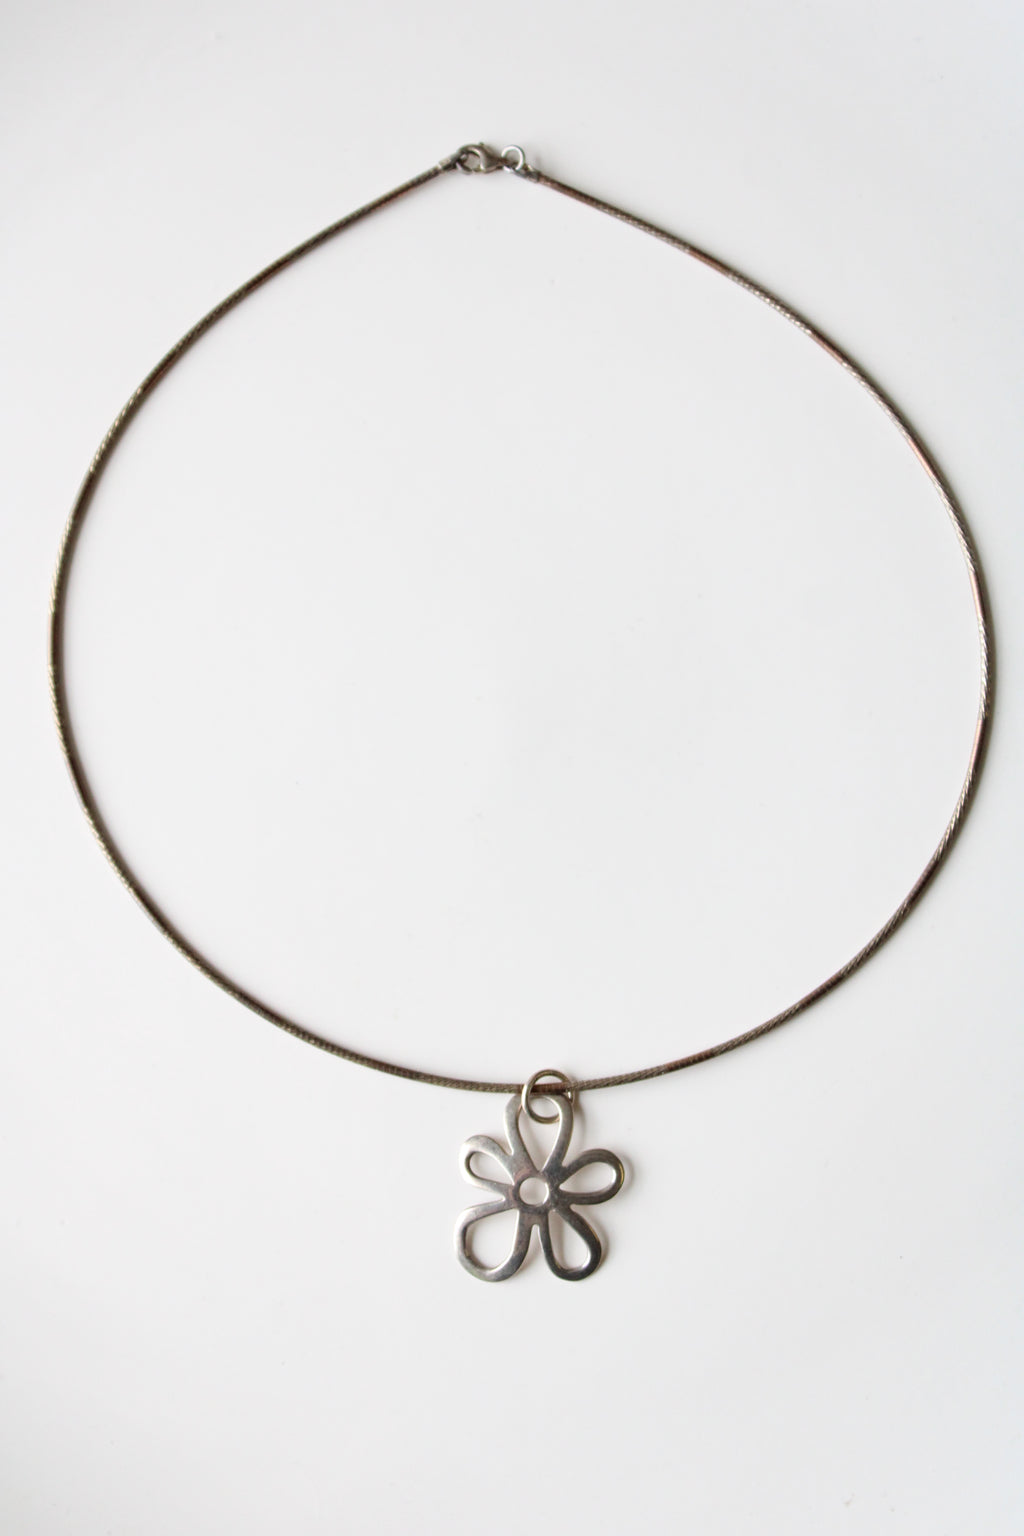 Retro Flower Pendant Sterling Silver Necklace